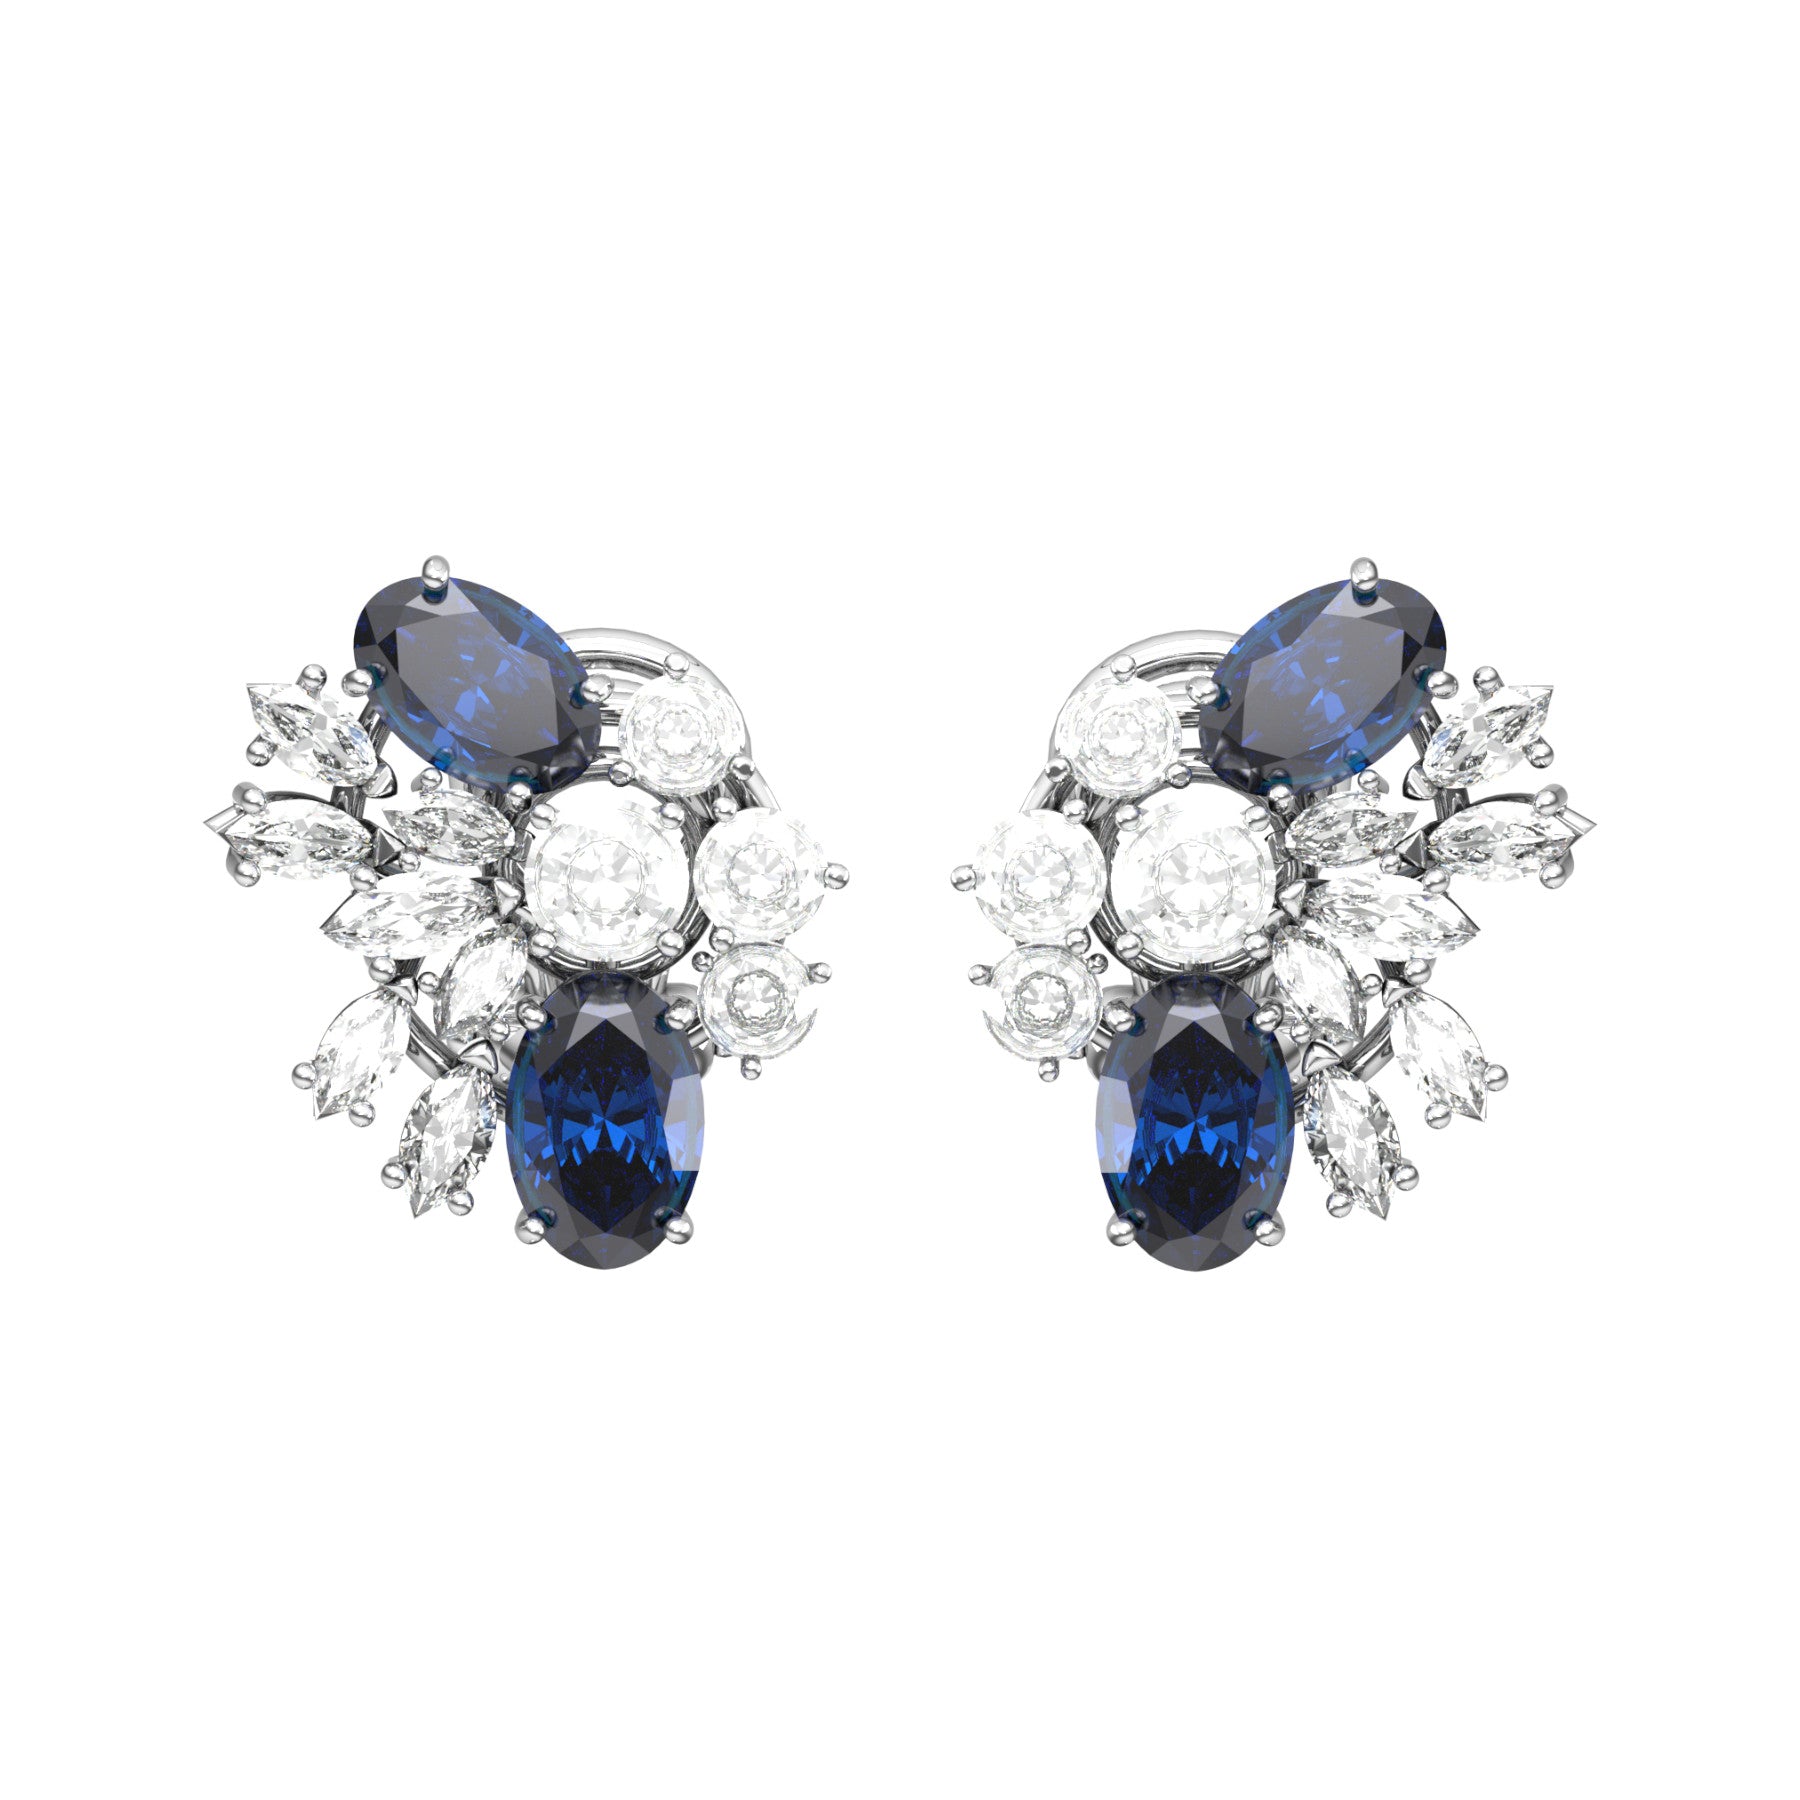 arya earrings,natural oval sapphires, natural round and navette diamonds, 18K white gold, weight abot 5,0 g (0.18 oz), length 15,6 mm max